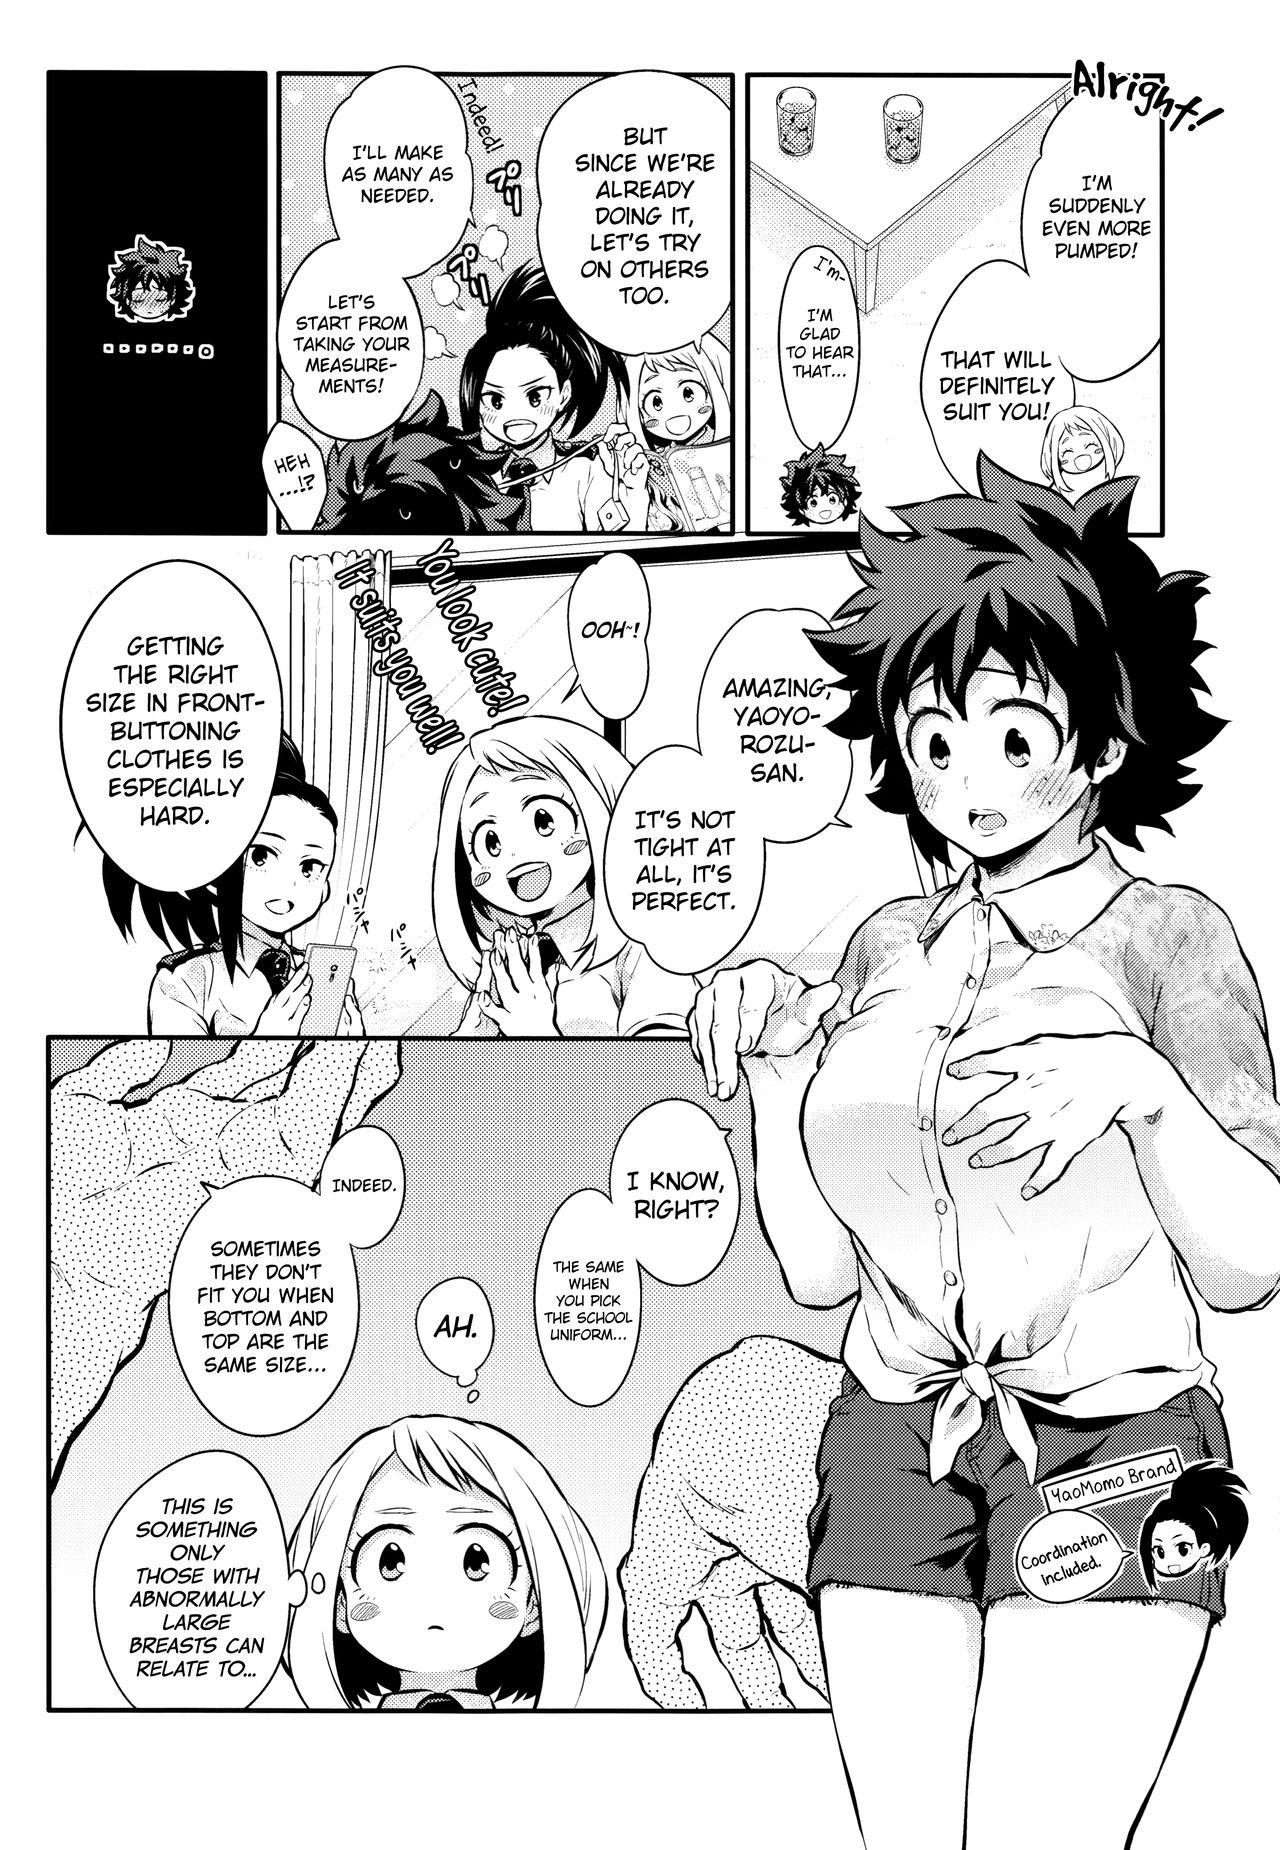 Amateur Porn Love Me Tender another story - My hero academia Reverse - Page 6